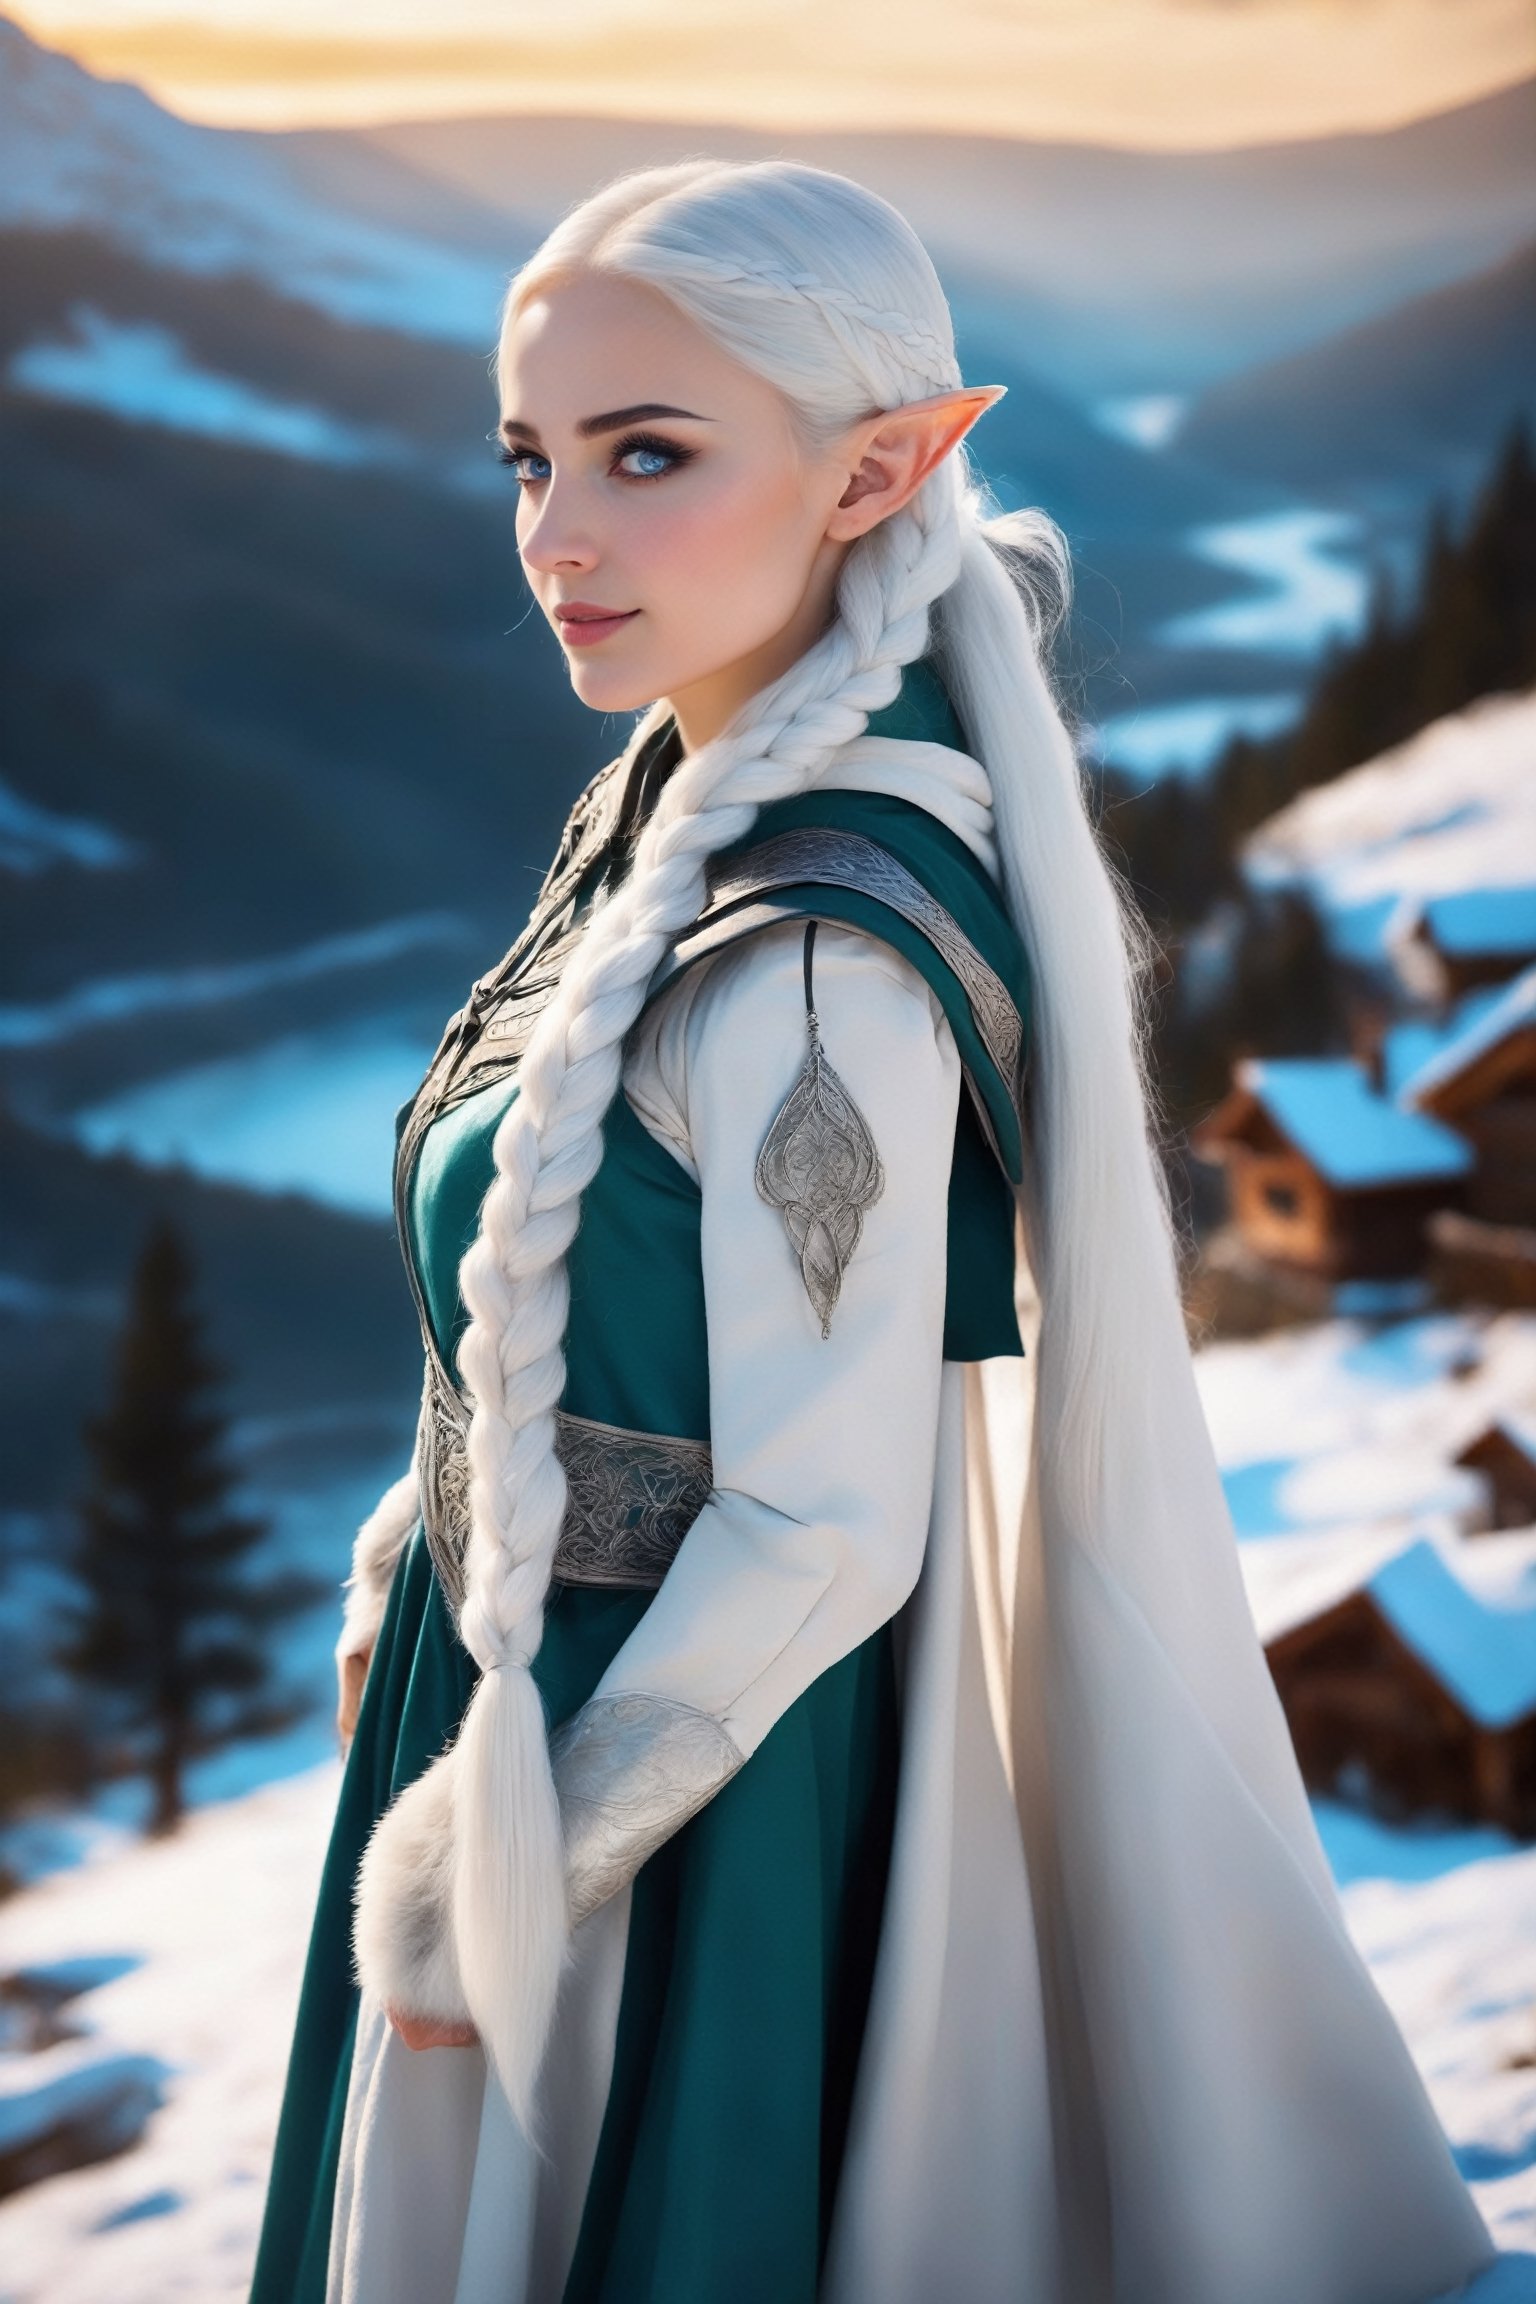 Extreme detailed,ultra Realistic,
beautiful young ELF lady,platinum silver shining hair, long elvish braid, side braid, blue-grey eyes,elf ears,
Wearing leather tunic, hooded cloak, animal fur hood, intricate clothing, animal fur clothing, dark clothing, waistband, scarf, soft smile, bending posture, looking into the distance, 
snowy mountain scenery, overlooking valley, river, white clouds, seen from behind,ol1v1adunne,Eyes,dal